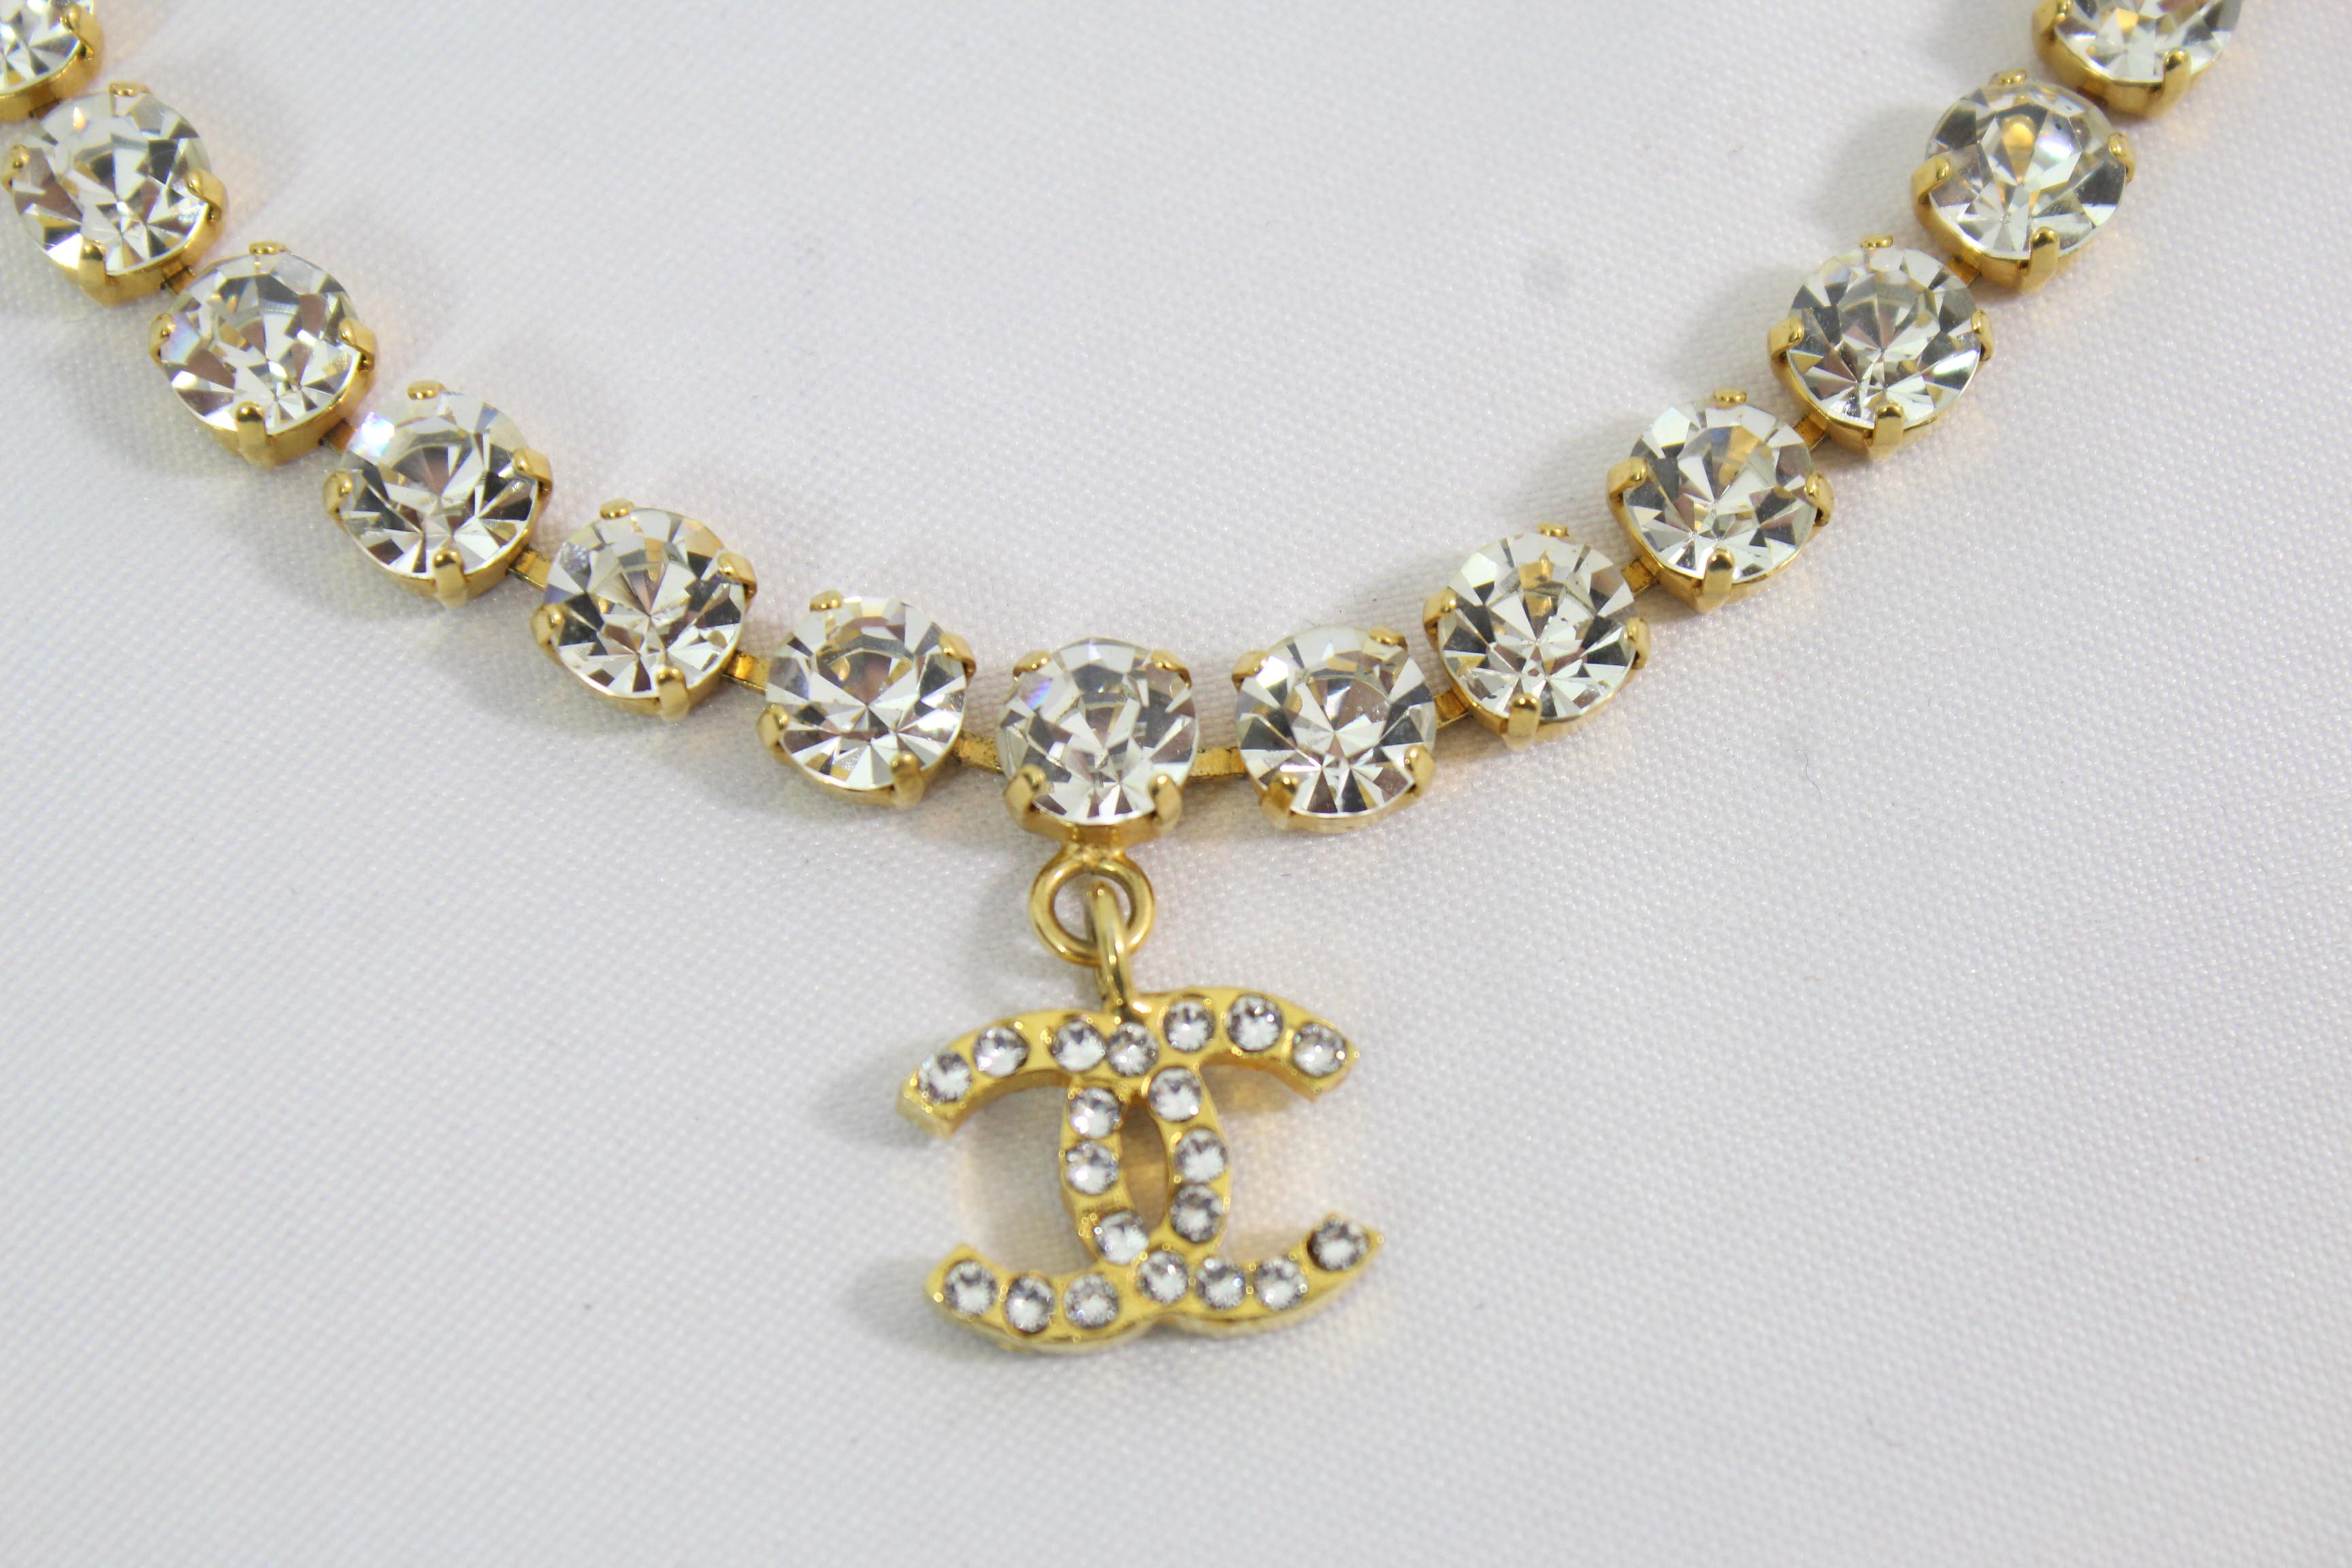 Chanel Vintage Gold Plated necklace with Swarovsky crystals and double CC pendant
Signed in the back
Necklace in good vintage condition
Length 18 inches
Sold with Box and paper bag
Lenght 14.5 inches